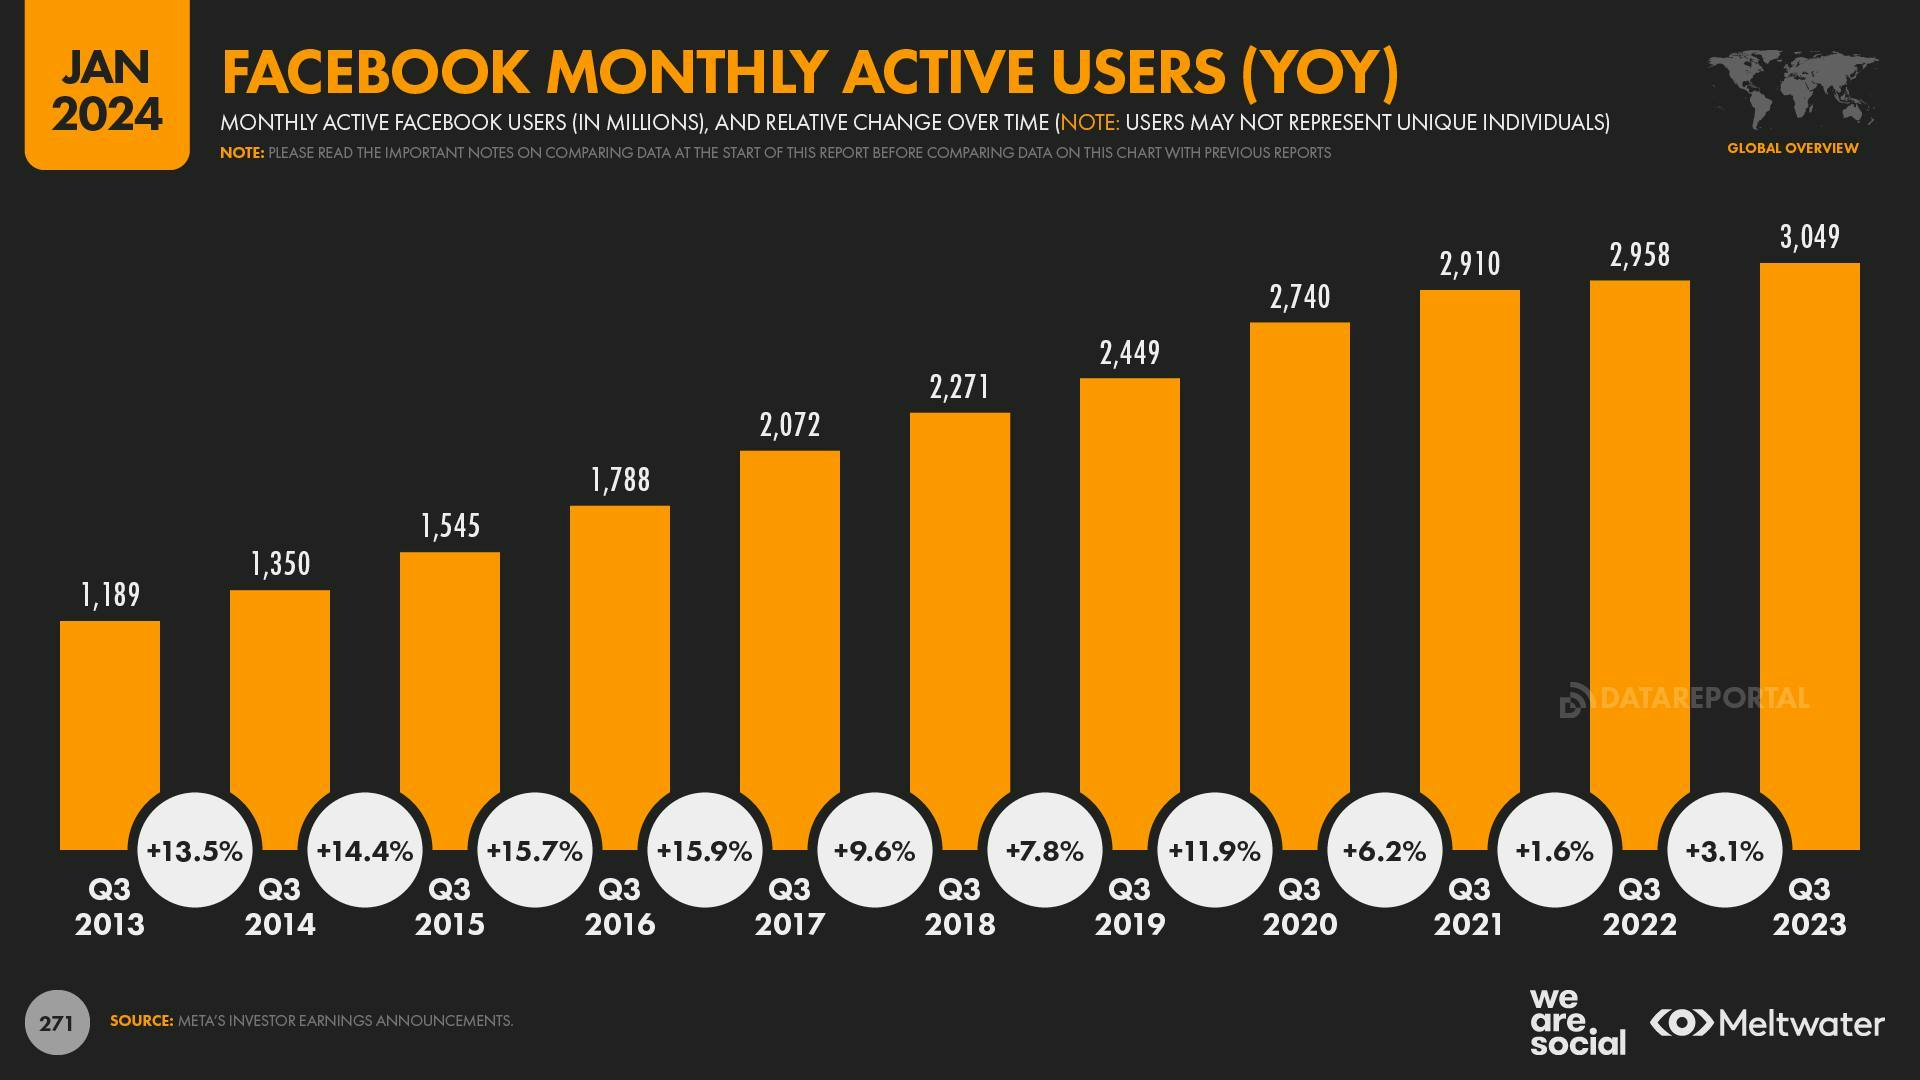 Facebook monthly active users (YOY)